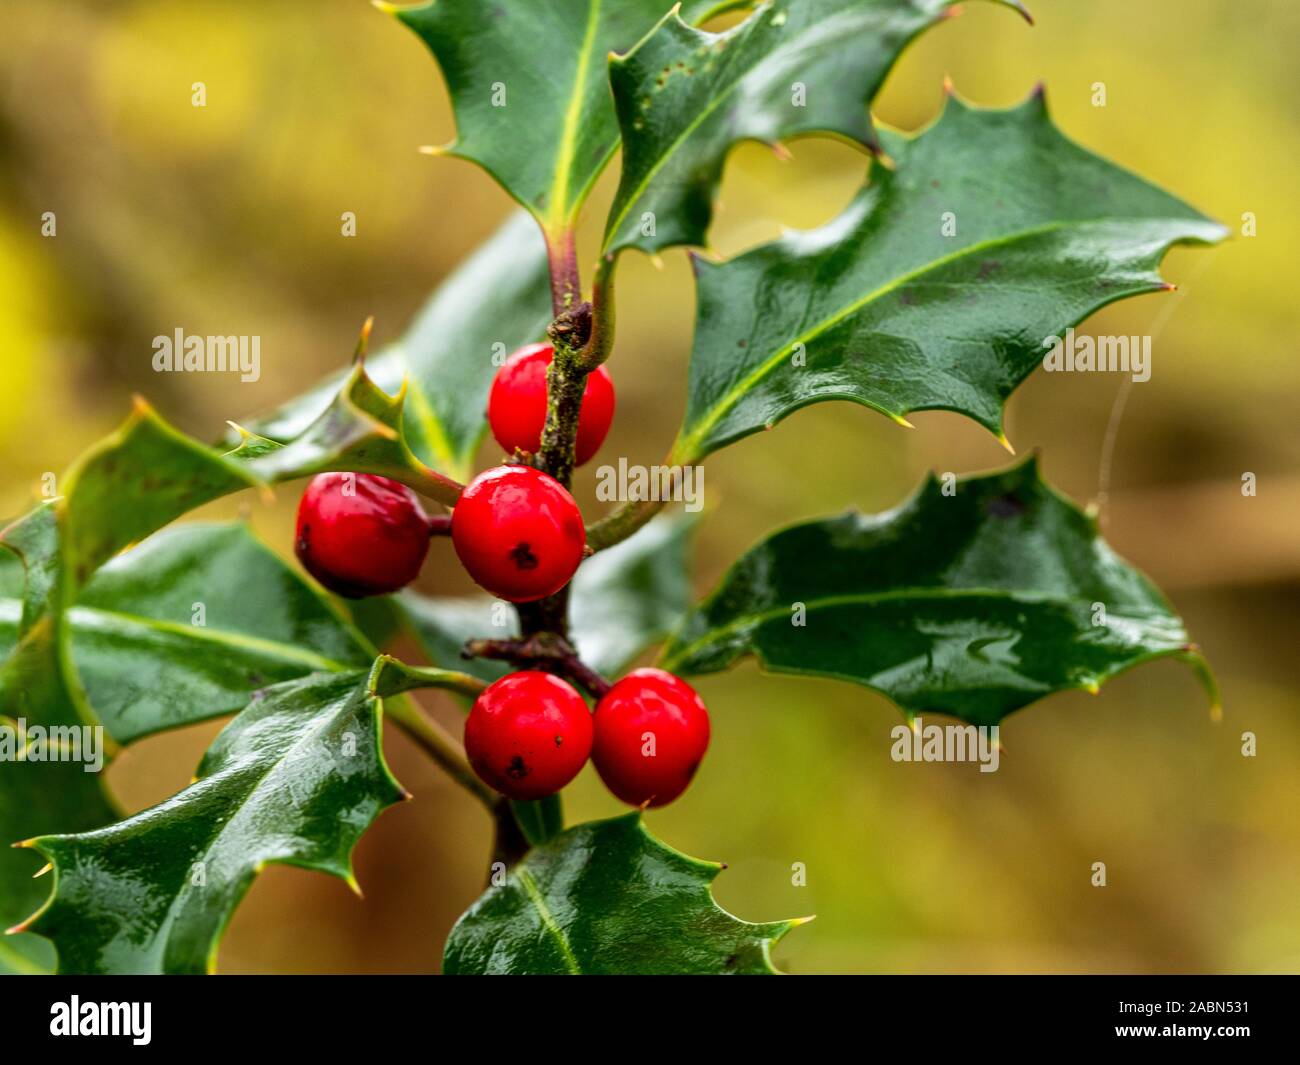 Red berries and shiny wet green leaves on a holly bush in a garden Stock Photo